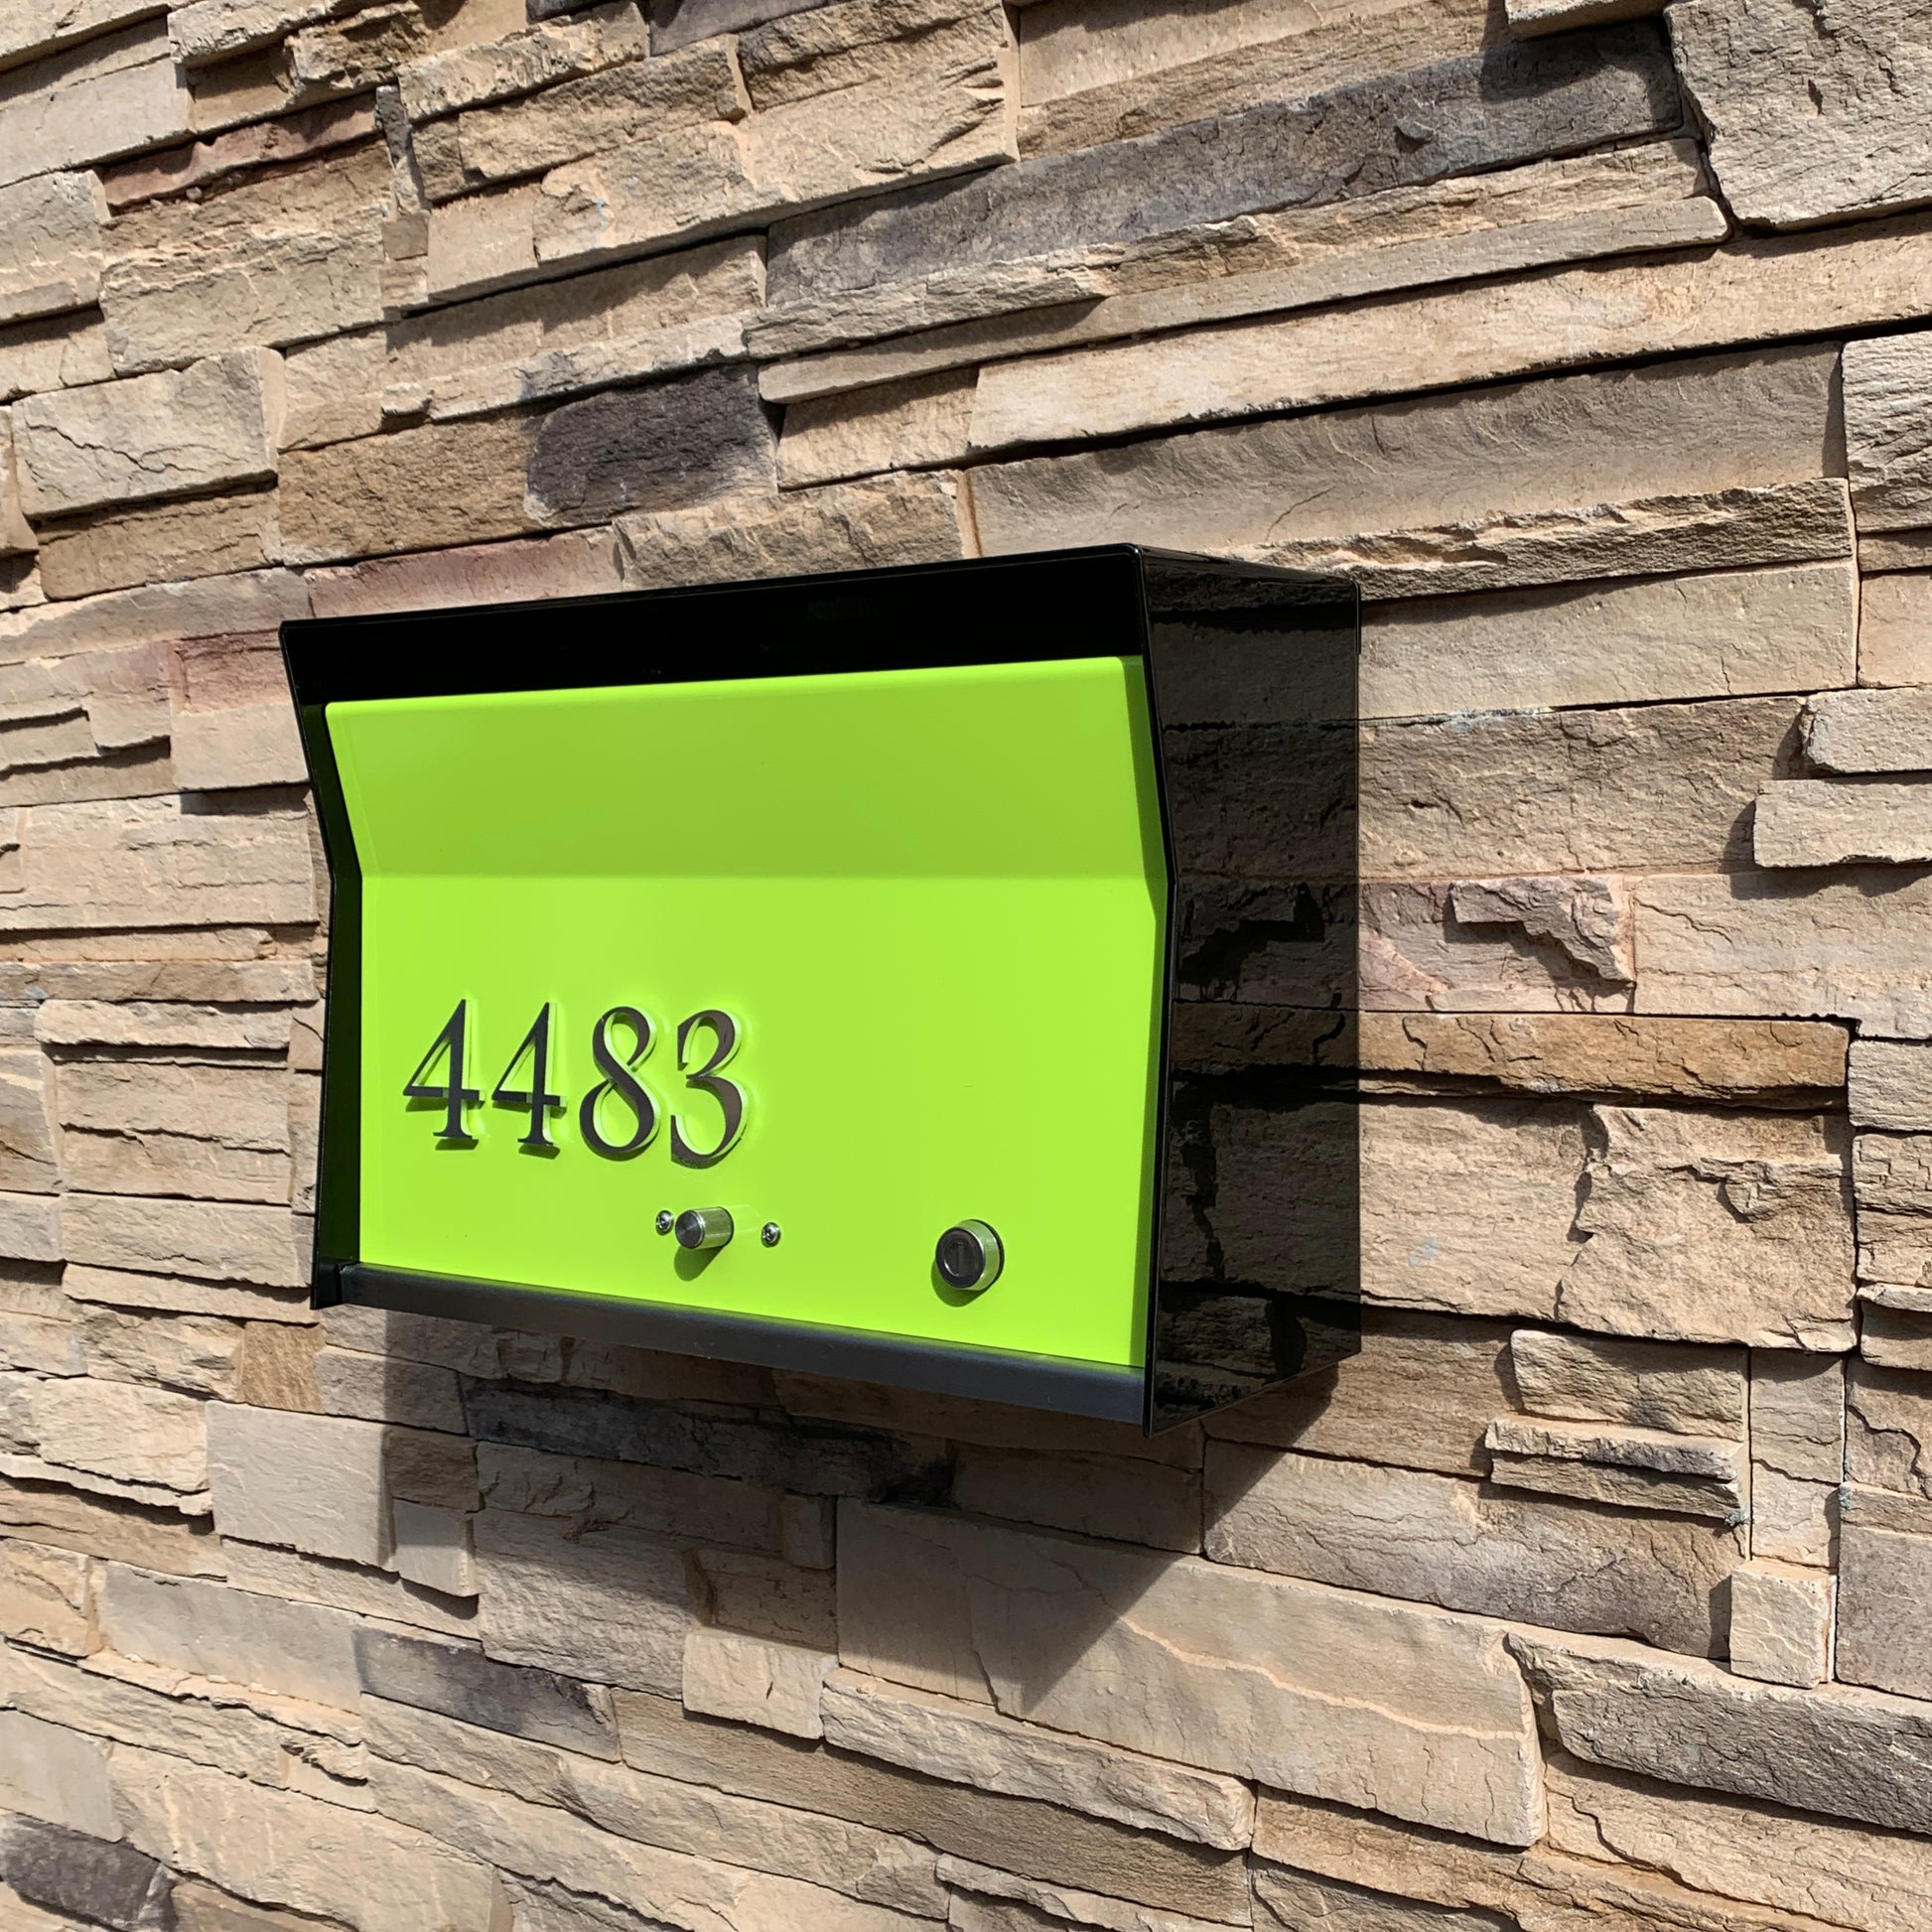 Wall Mount Mailbox mounted to outdoor wall. RetroBox in jet black and lemon lime